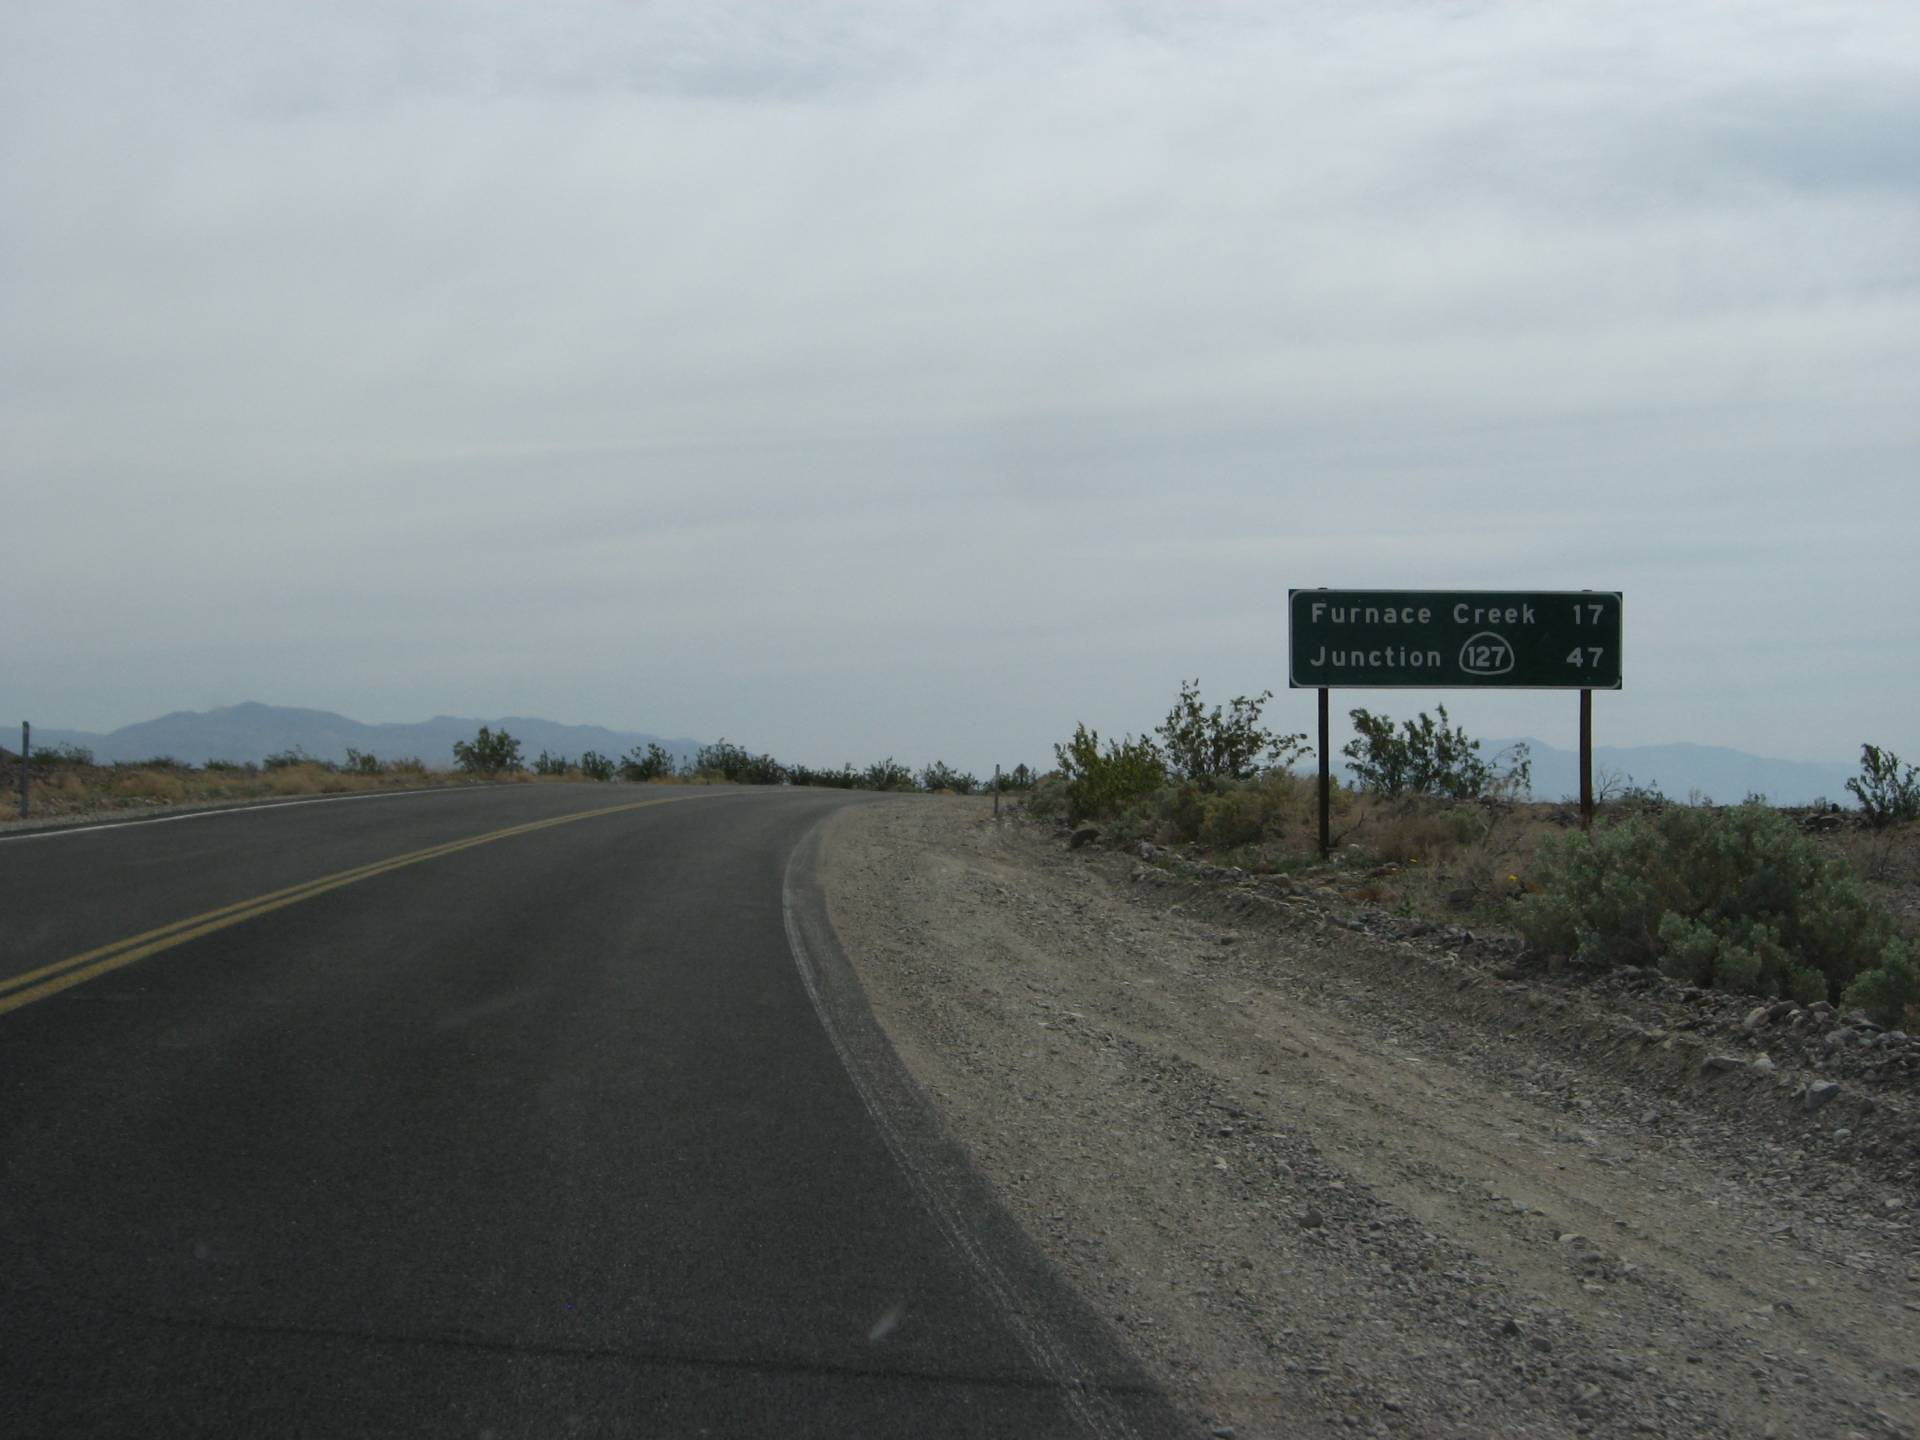 CA-190 between Furnace Creek and Stovepipe Wells, Death Valley National Park, California